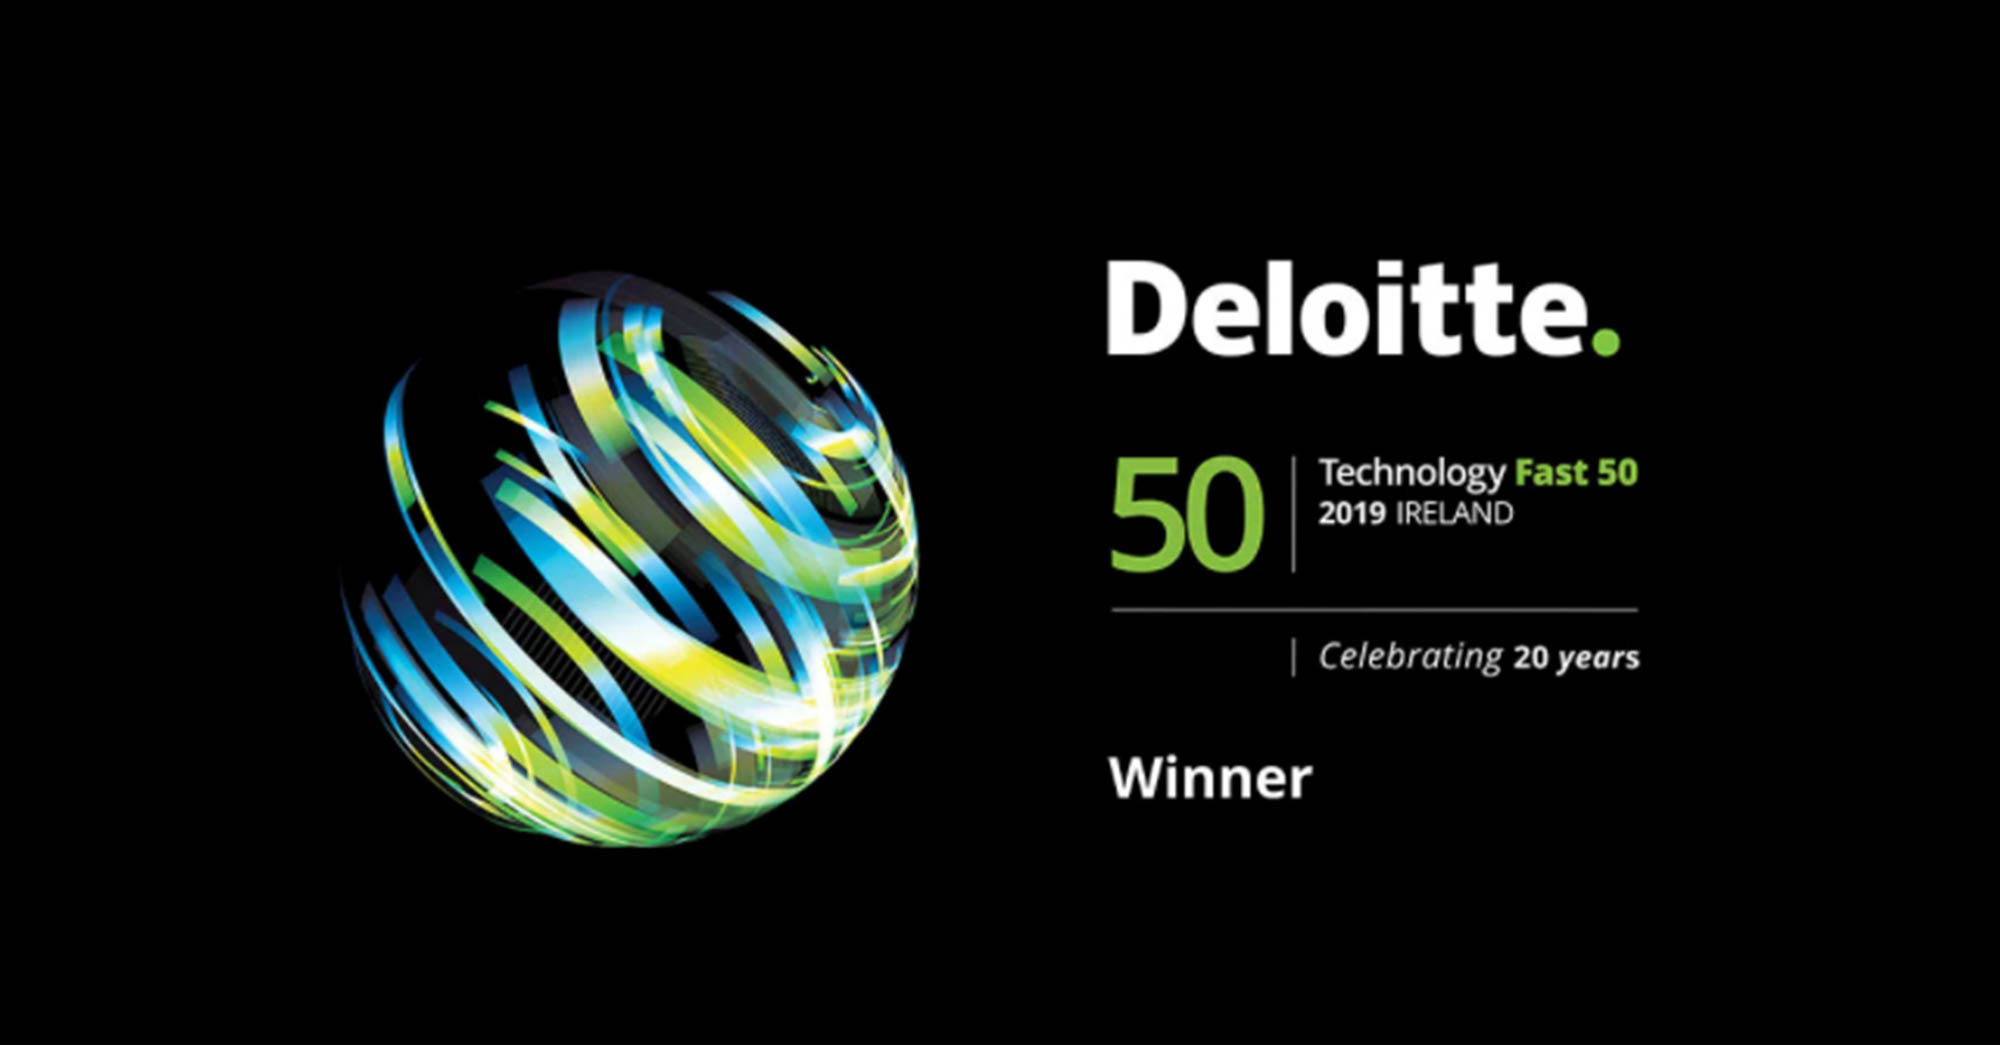 Global Shares on Deloitte Technology Fast 50 list 3rd year in a row